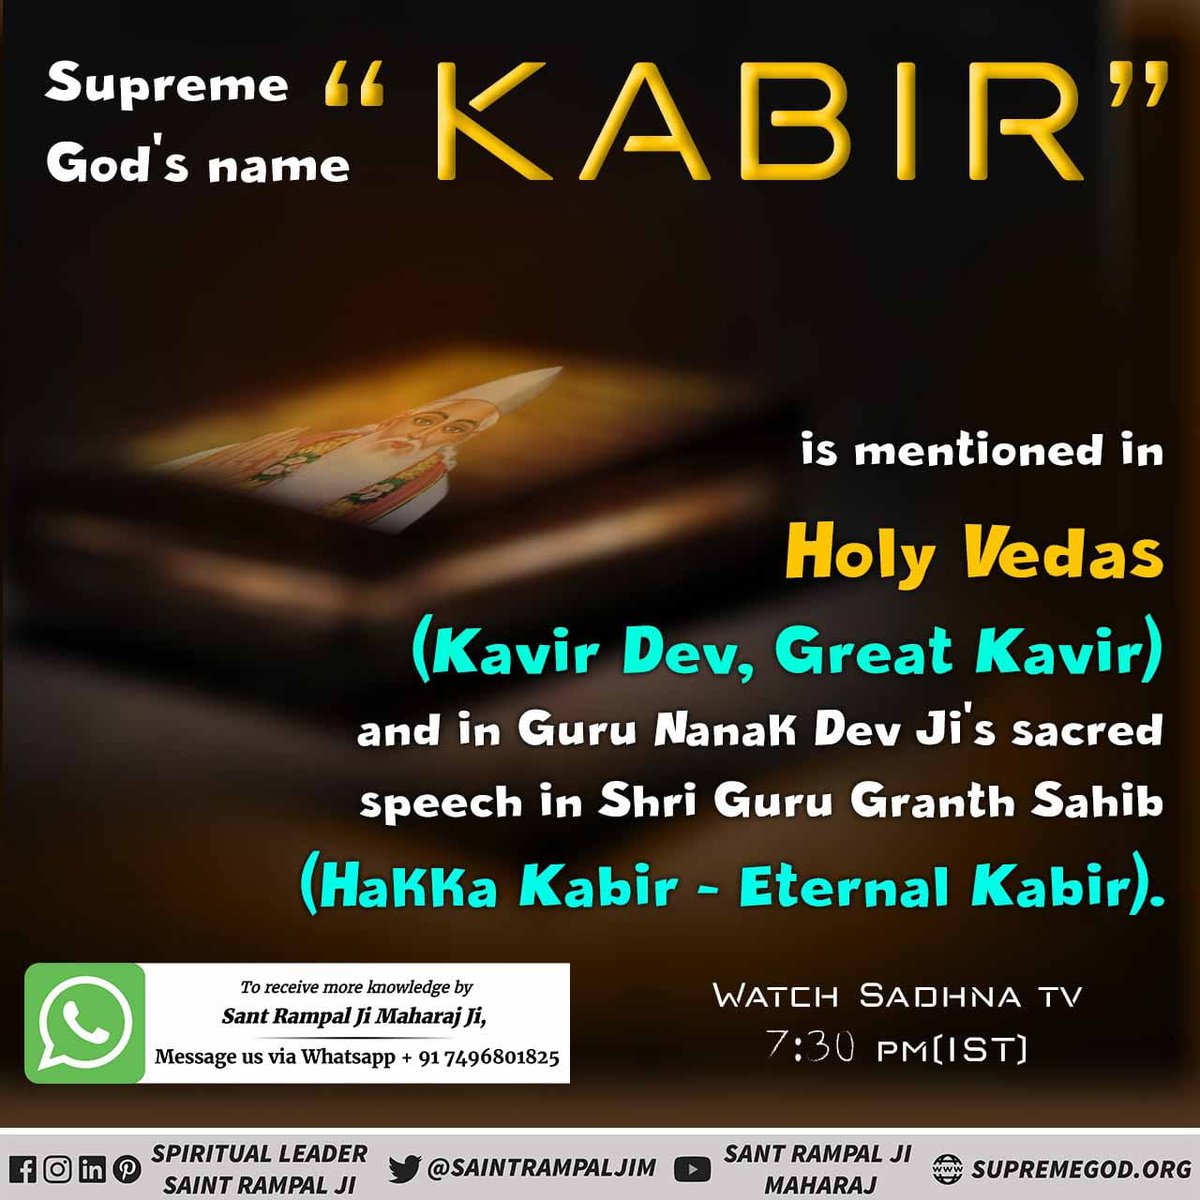 #आँखों_देखा_भगवान_को सुनो उस अमृतज्ञान को
Parmeshwar Kabir had also appeared to Hazrat Muhammad ji. Kabir Saheb also took Hazrat Muhammad ji to Satlok and introduced him to the real condition of all the worlds.